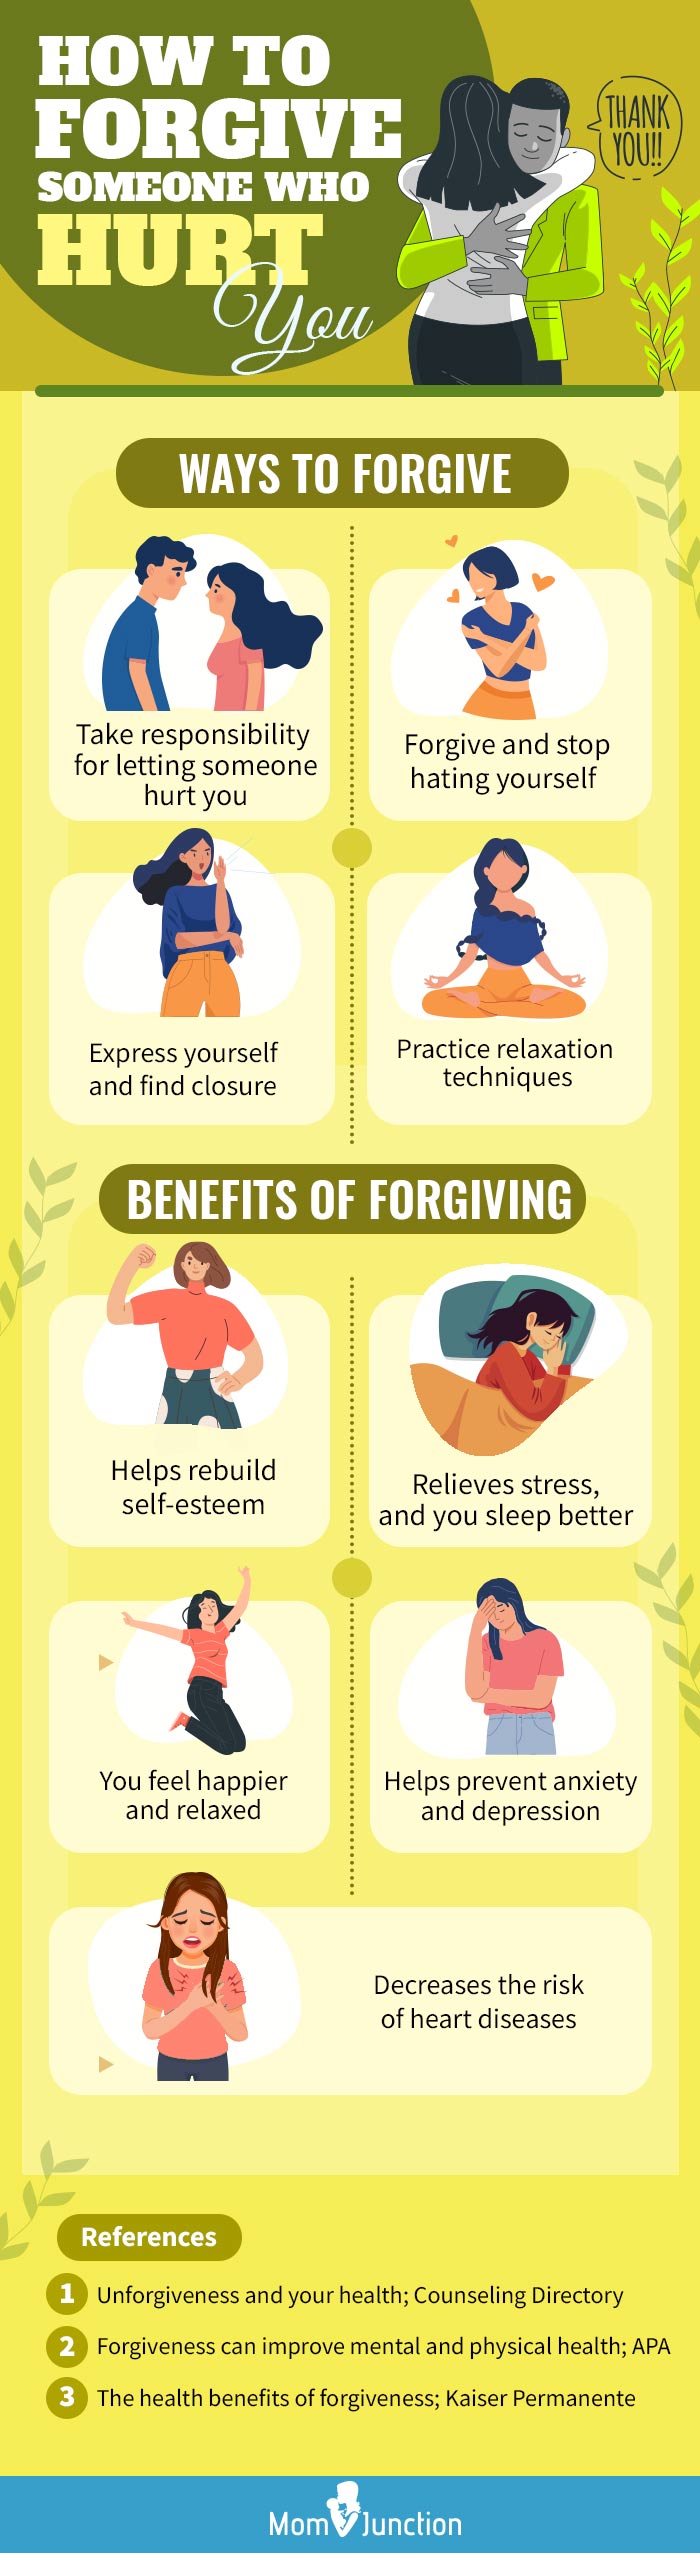 how to forgive someone who hurt you (infographic)